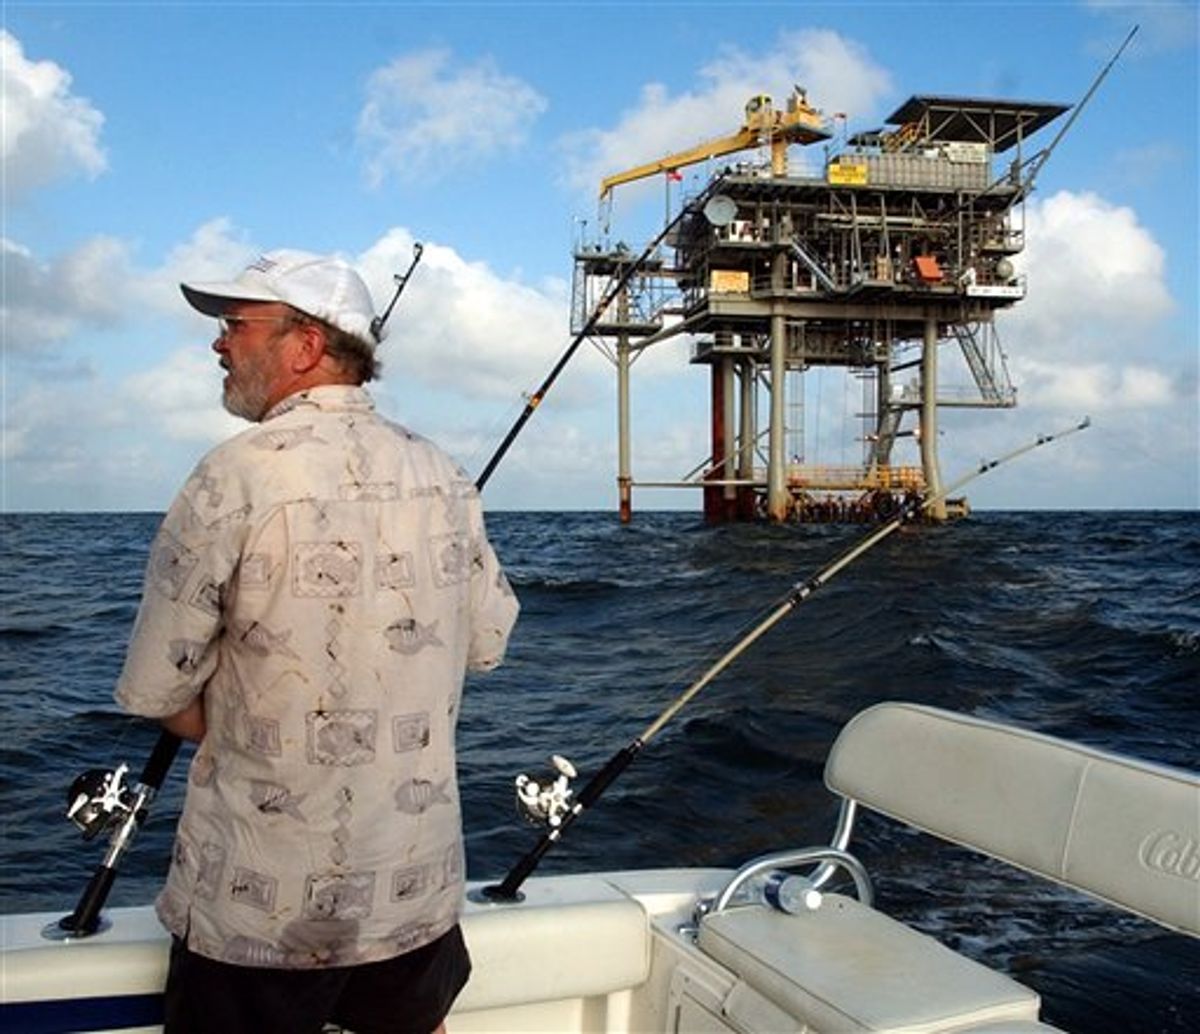 FILE - In a  in this Friday, May 9, 2003 file photo, angler Andy Hails, of Montgomery, Ala., checks the fishing lines on his boat as he trolls the Gulf of Mexico near a natural gas well off the Alabama coast near Gulf Shores, Ala. President Obama announced his new offshore drilling policy Wednesday, March 31, 2010. President Obama is allowing oil drilling off Virginia's shorelines and considering it for a large chunk of the Atlantic seaboard. At the same time, he's rejecting some new drilling sites that had been planned in Alaska.   (AP Photo/Dave Martin, File) (AP)